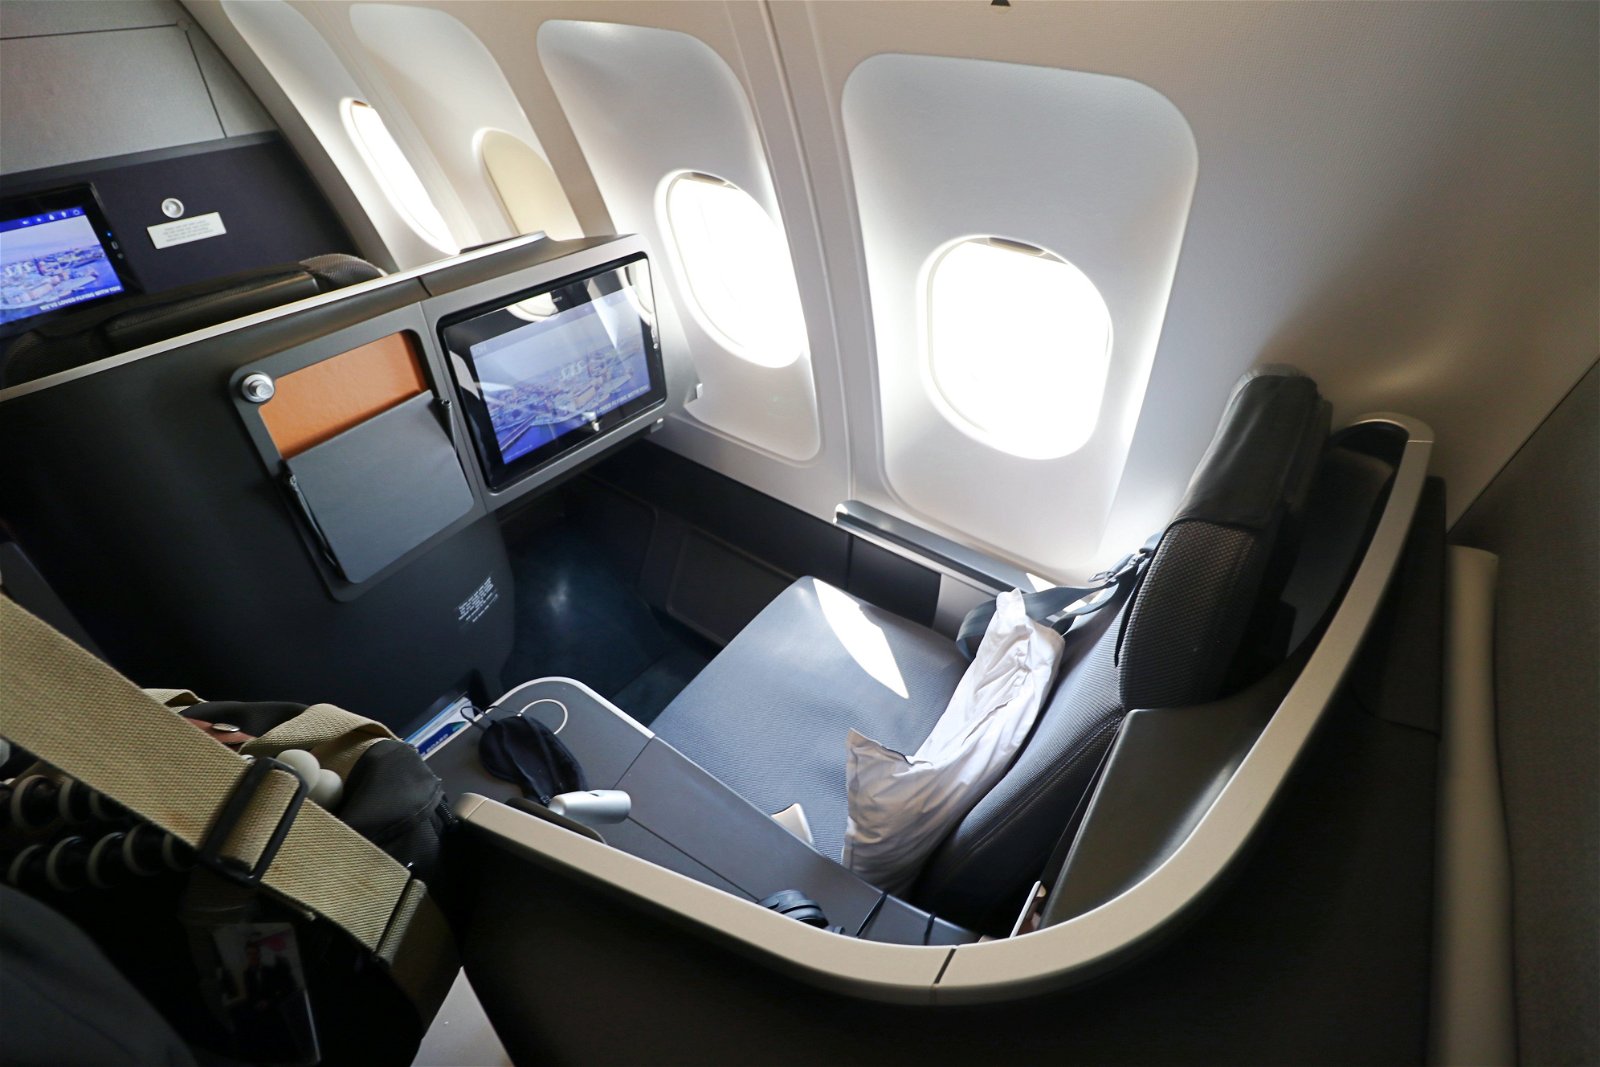 You could fly SAS Business Class between Miami and Stockholm, but good luck finding award availability.